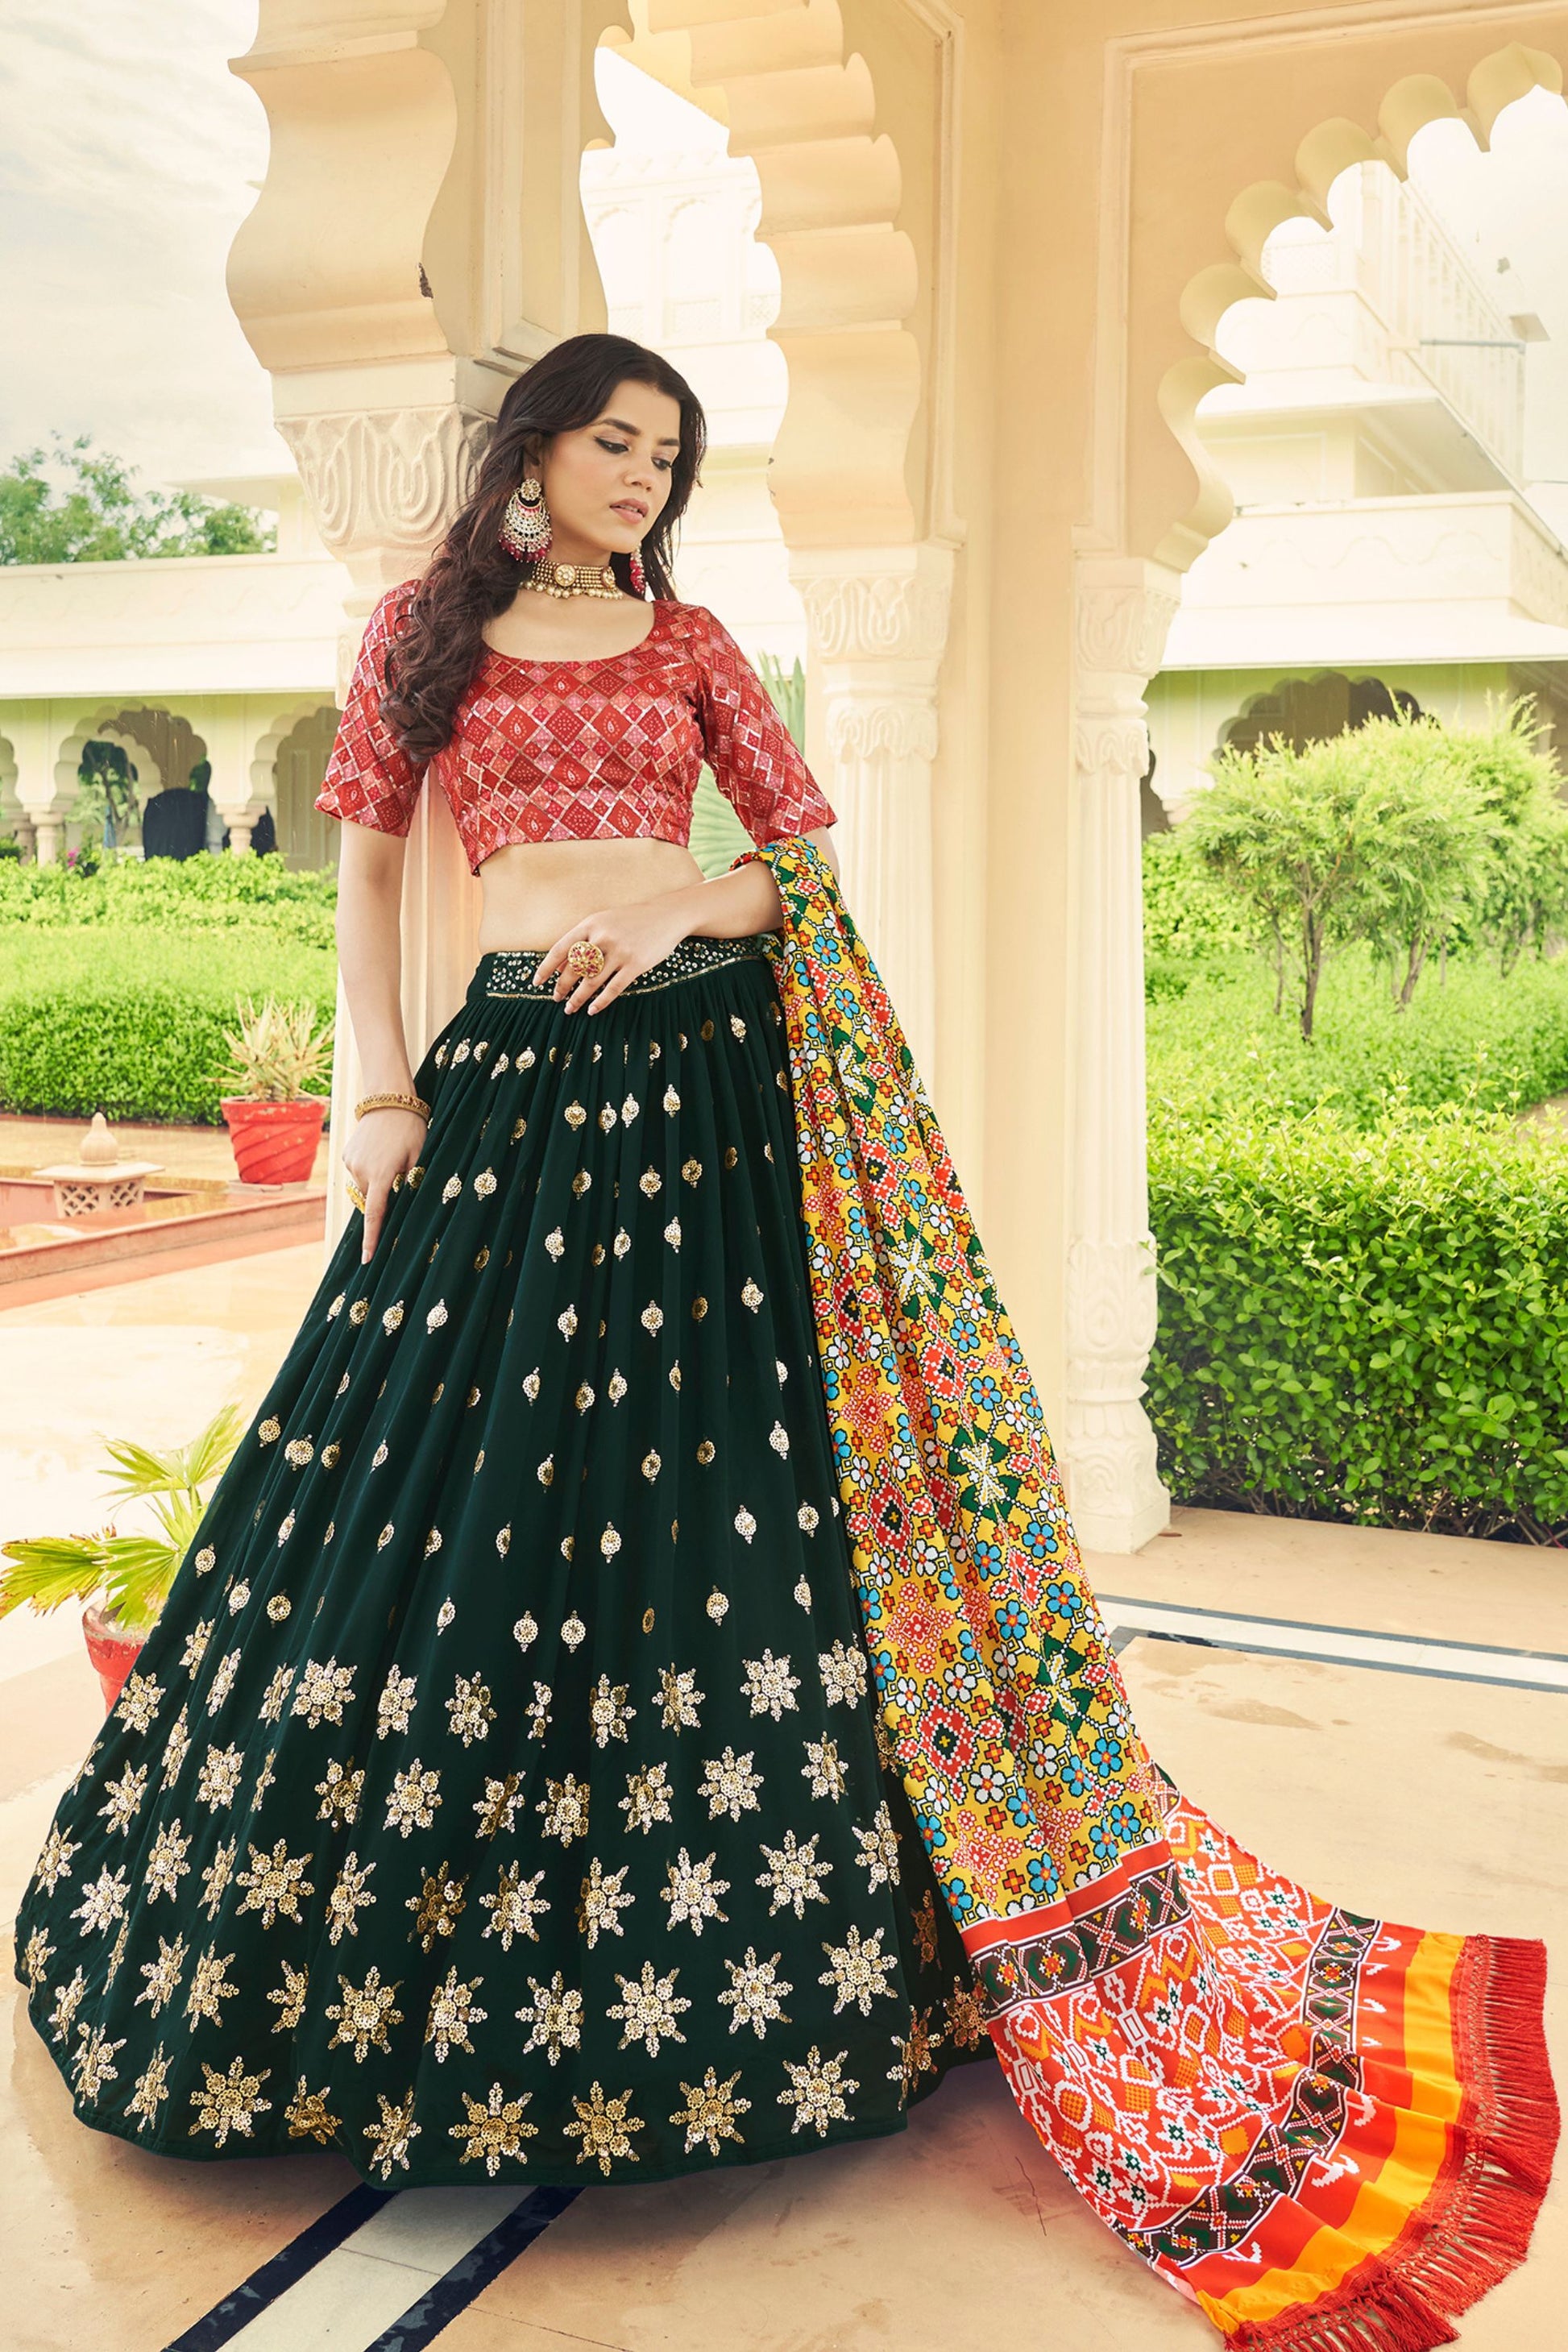 Green Georgette Lehenga Choli For Indian Weddings & Festivals - Thread Work, Sequence Embroidery Work